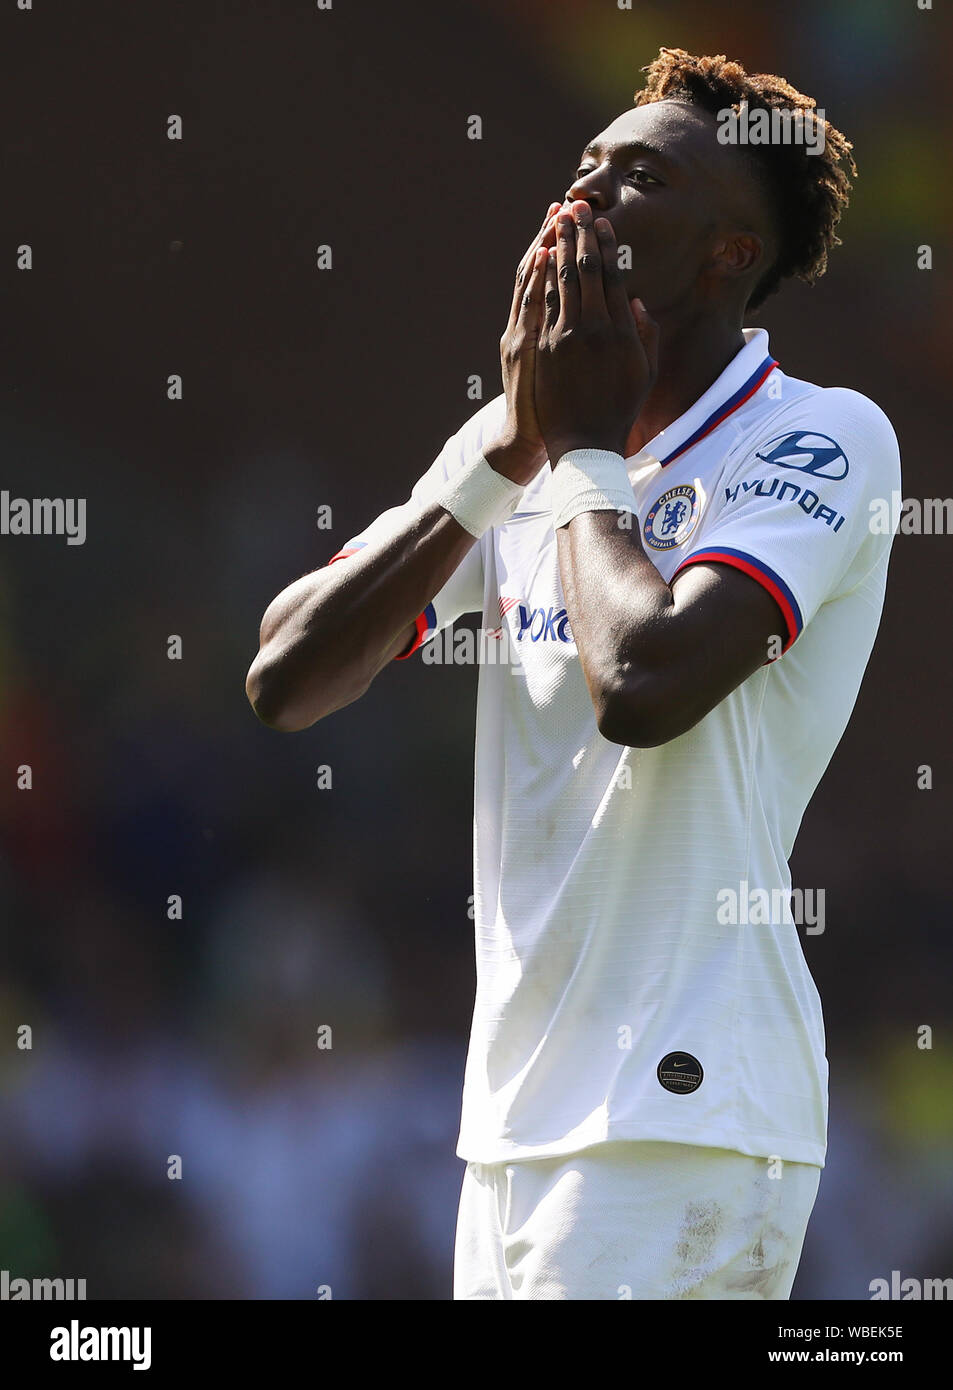 Winning goal scorer, Tammy Abraham of Chelsea celebrates - Norwich City v Chelsea, Premier League, Carrow Road, Norwich, UK - 24th August 2019  Editorial Use Only - DataCo restrictions apply Stock Photo